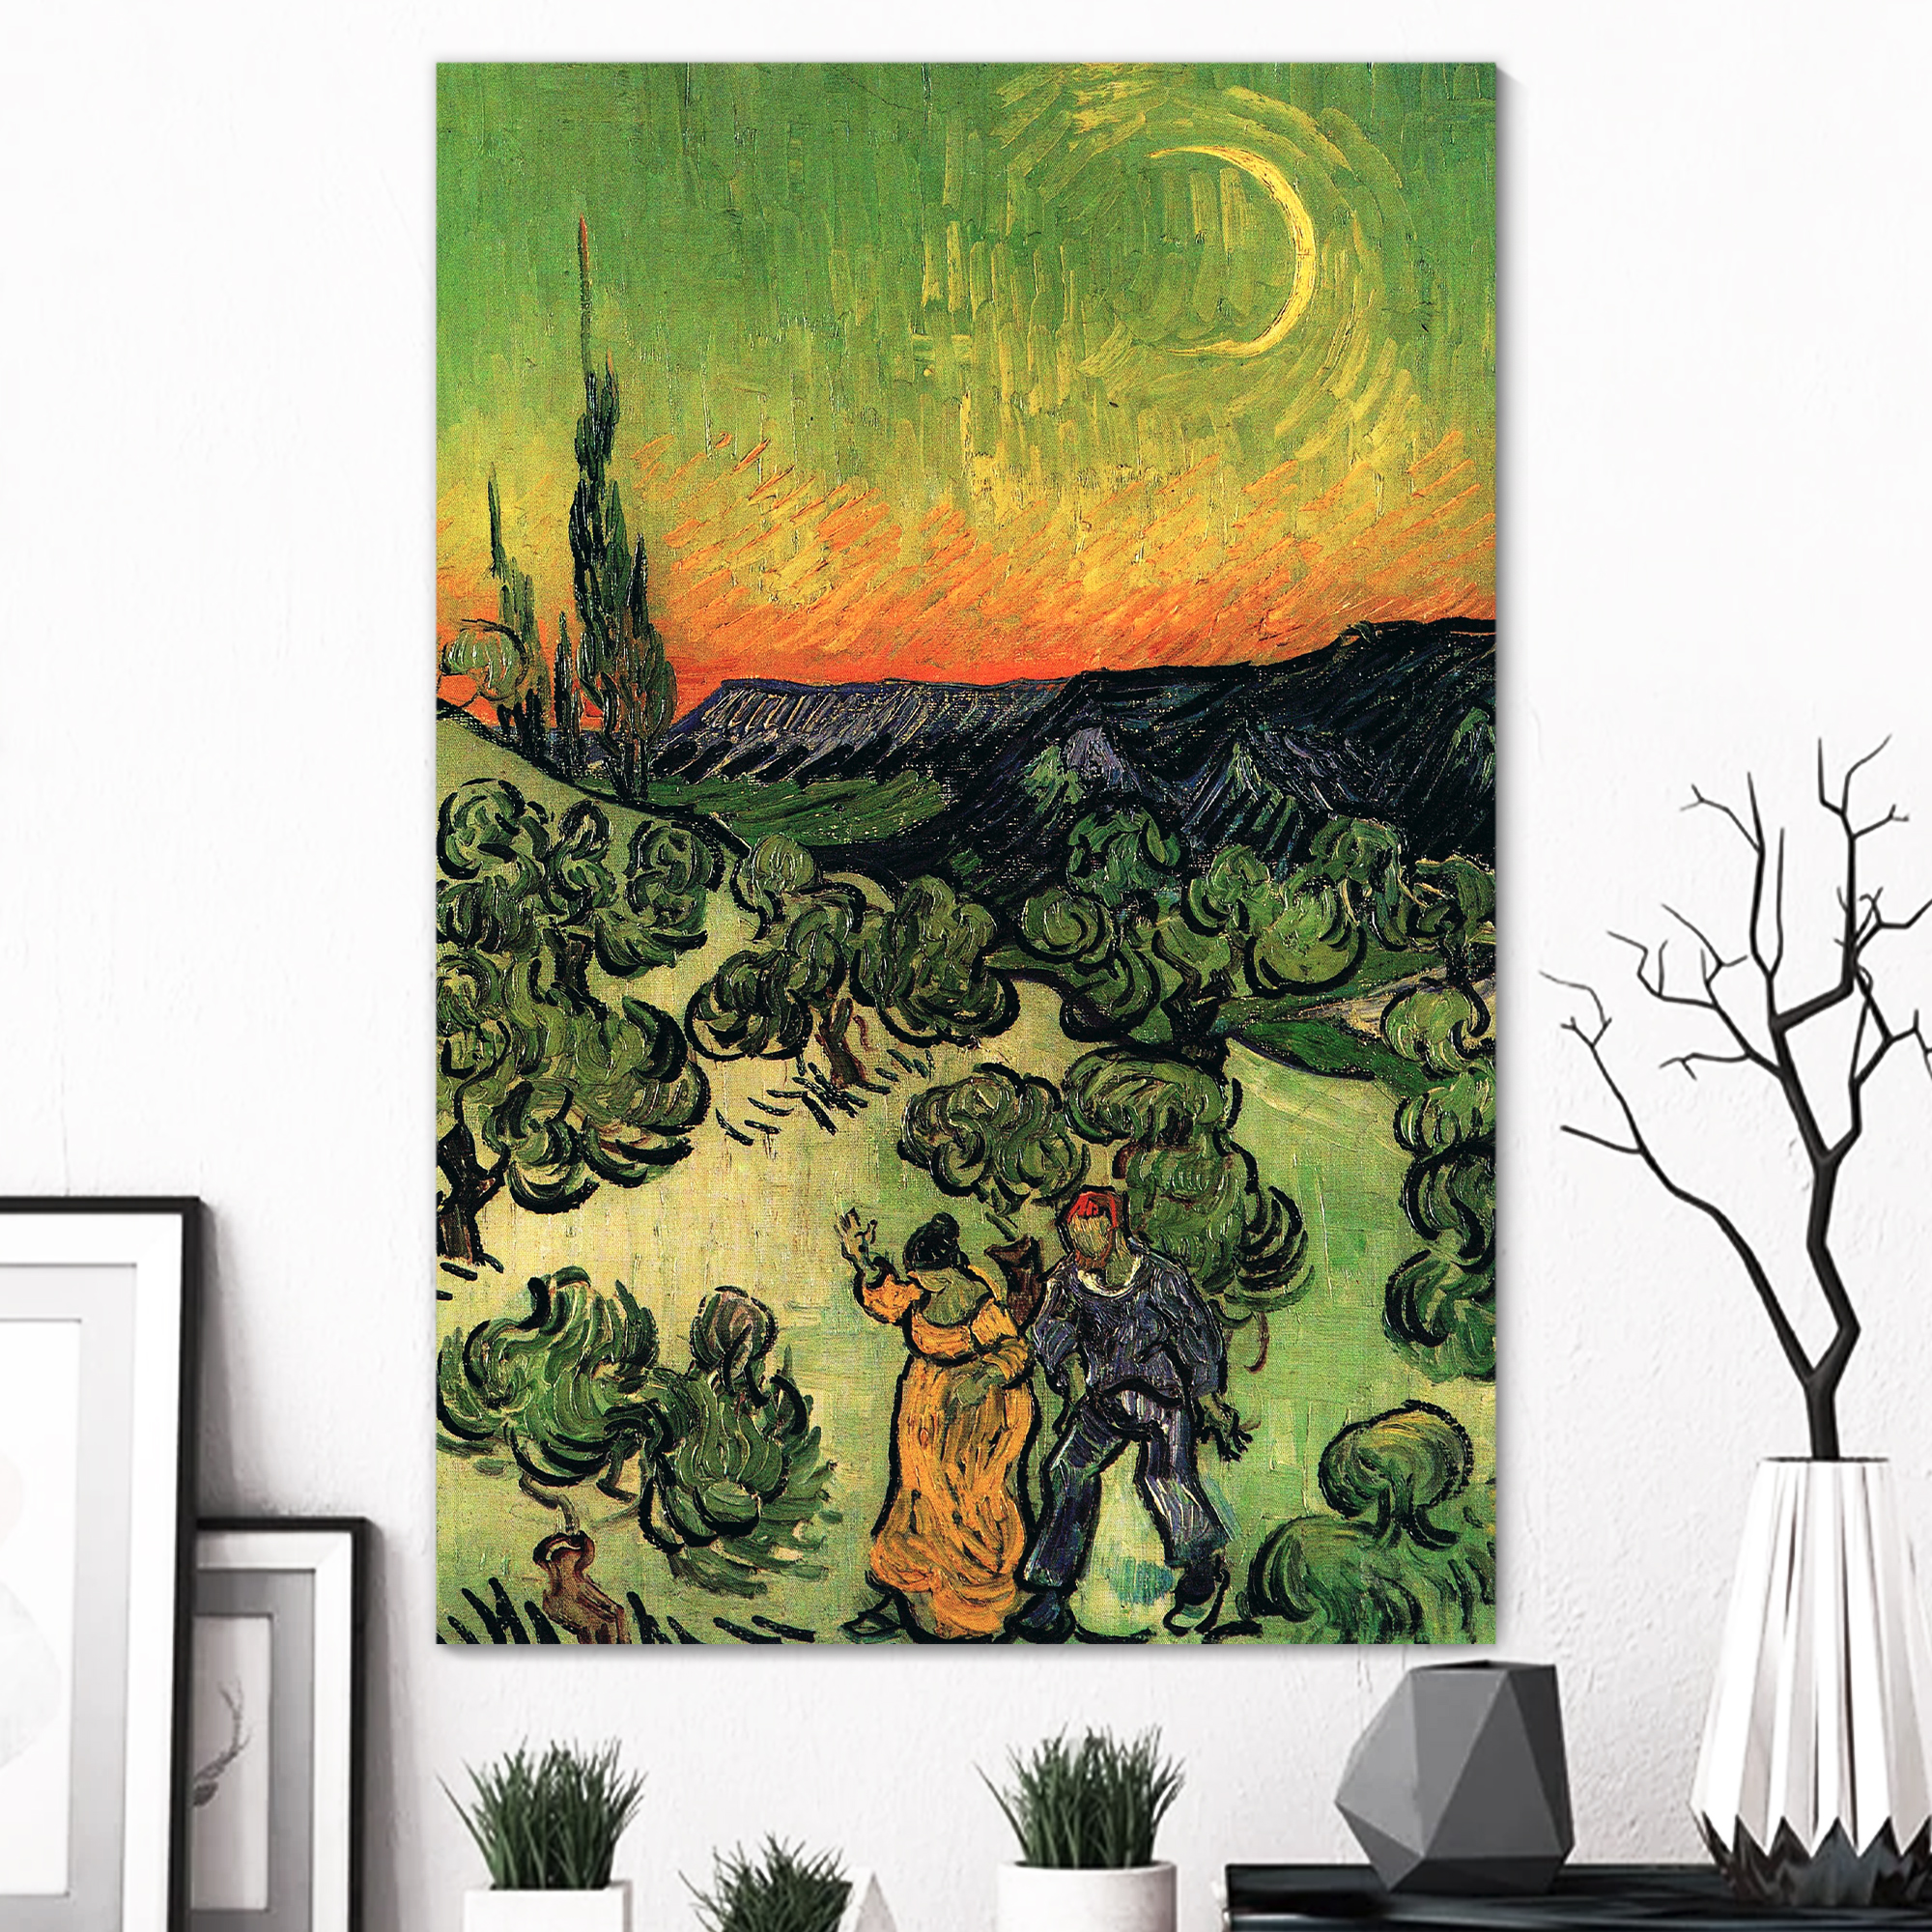 Landscape with Couple Walking and Crescent Moon by Vincent Van Gogh - Canvas Print Wall Art Famous Painting Reproduction - 24